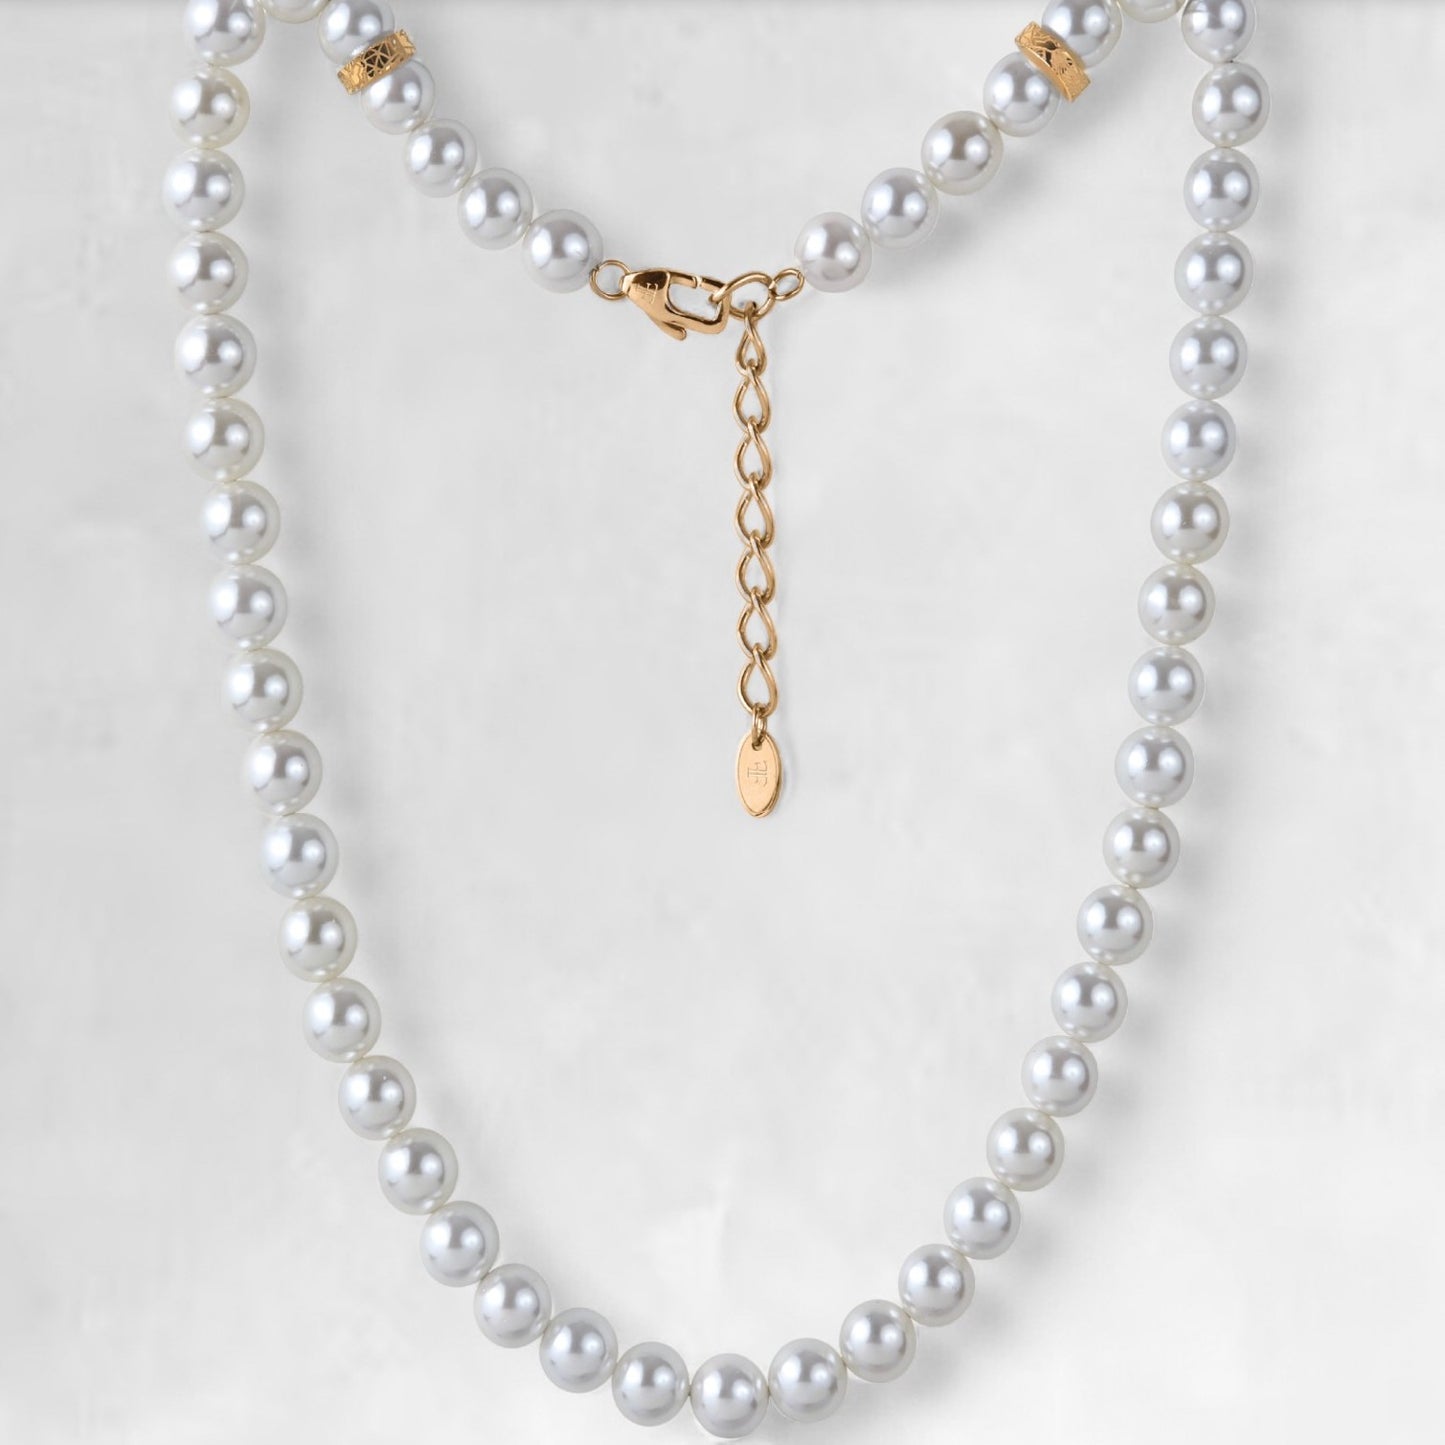 FORTIER [10MM PEARL NECKLACE - GOLD]